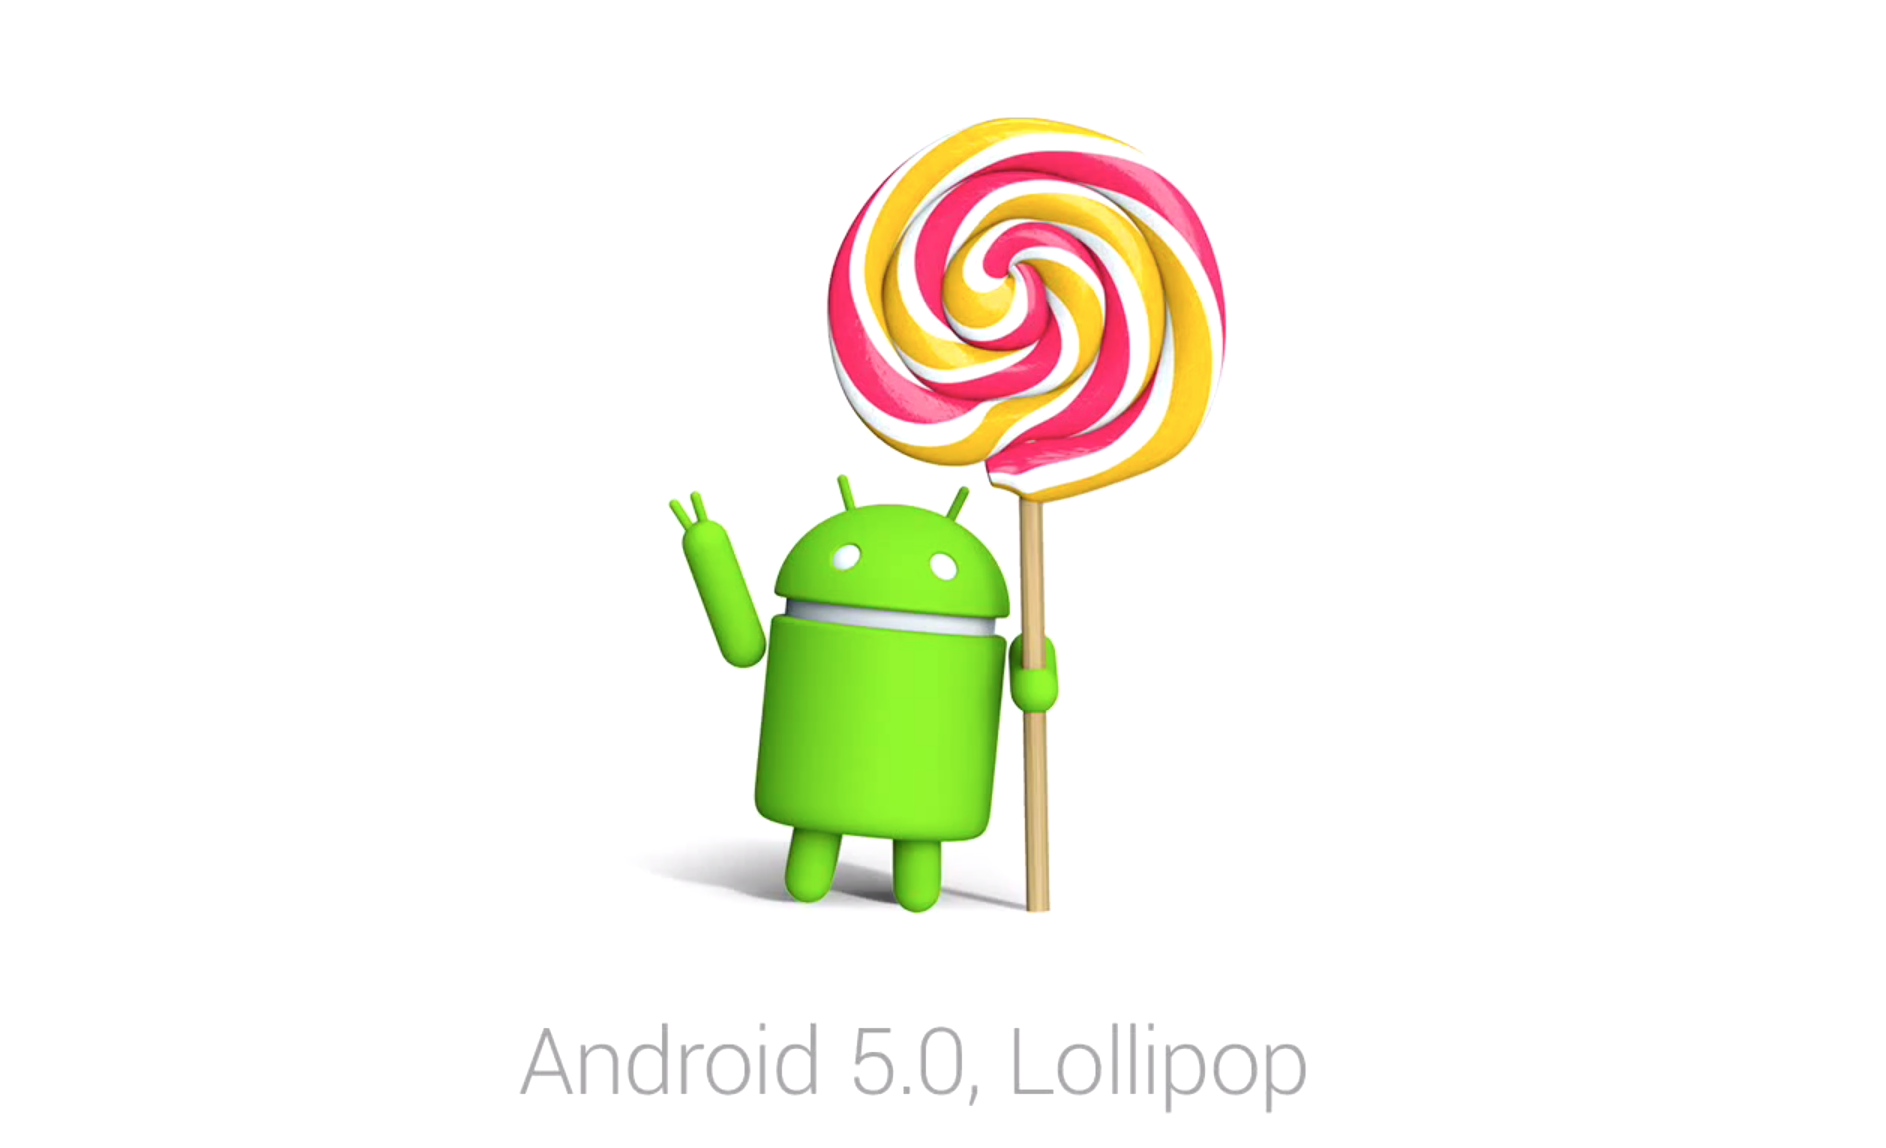 sprint-galaxy-s5-android-5.0-lollipop-ota-update-goes-live-todayihuiury.png